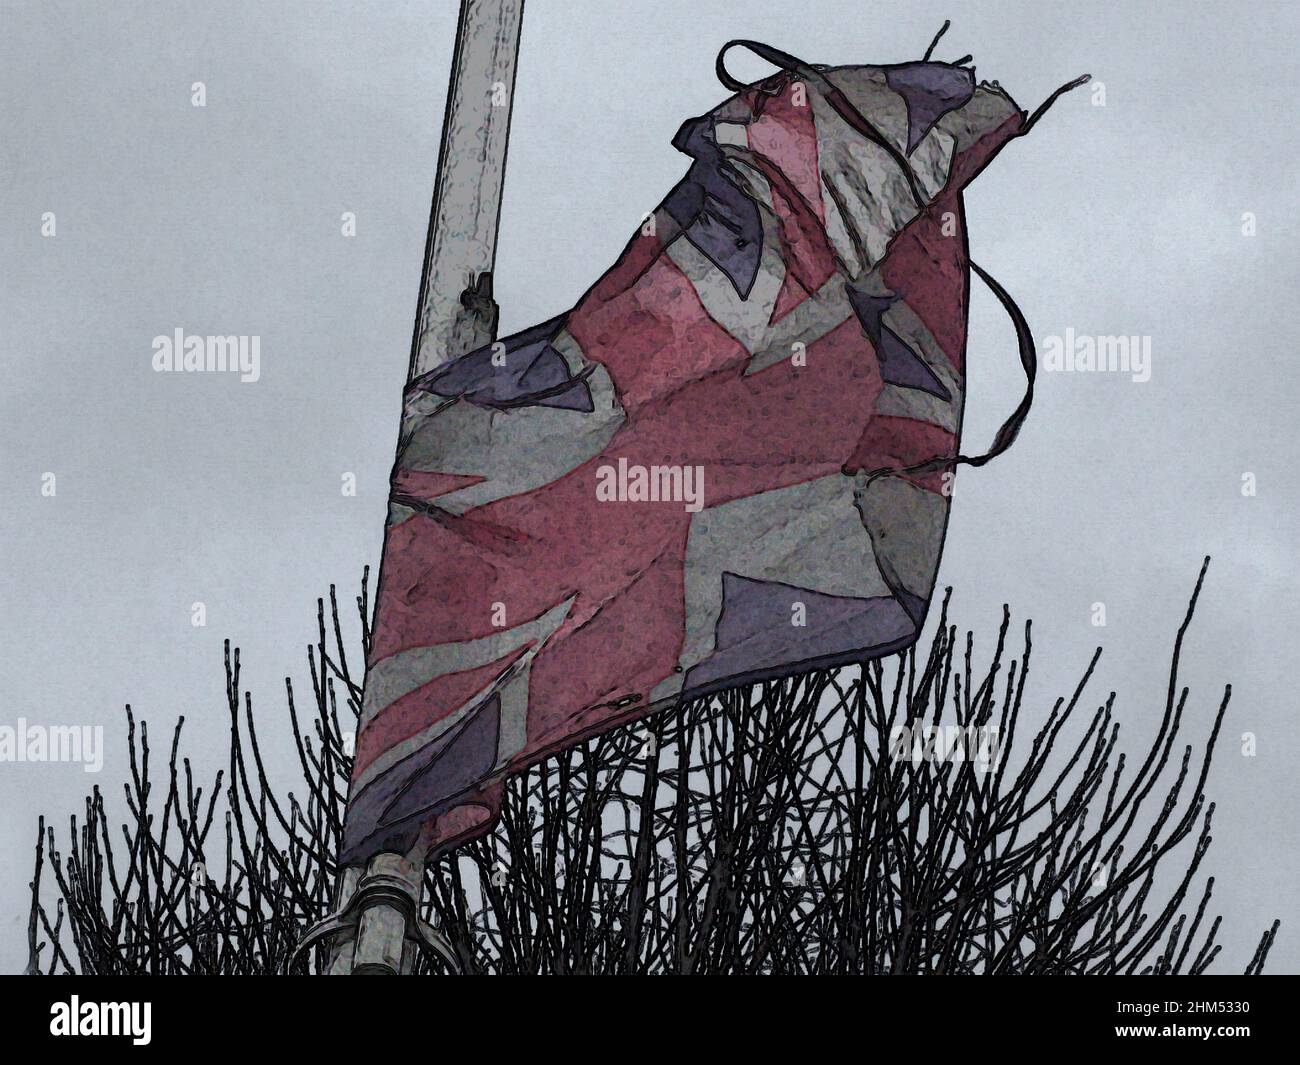 Concept art post Brexit Britain tattered faded Union Jack flag against a backdrop of thorns & grey sky Corruption, loss of international respect/pride Stock Photo